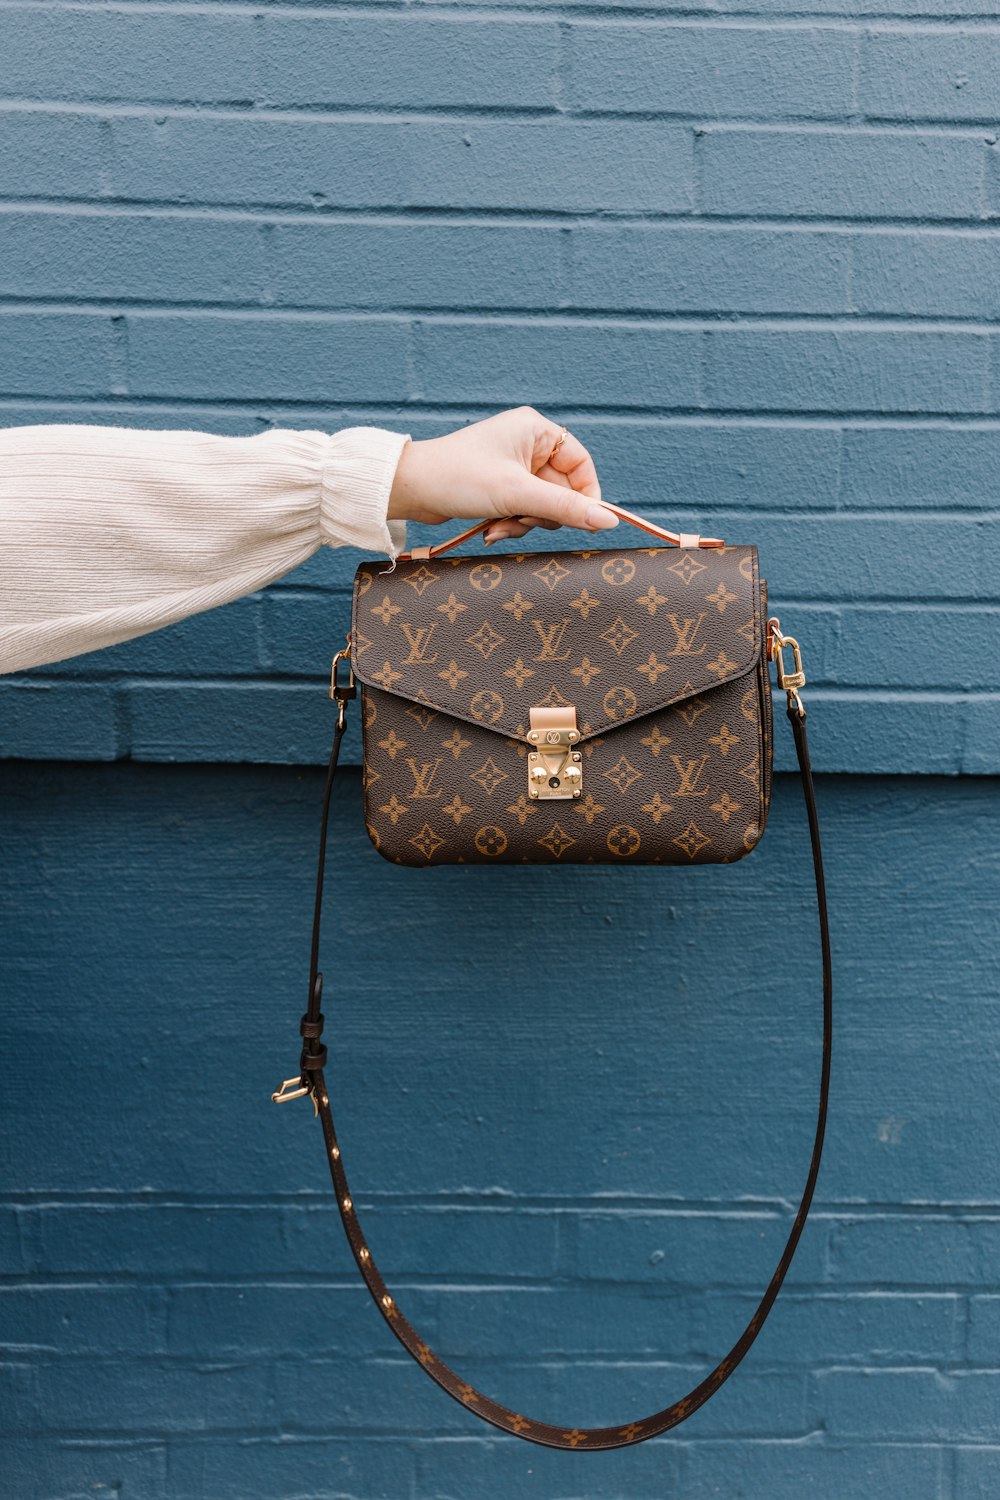 Revolutionize Your Louis Vuitton Bag With These Easy-peasy Tips